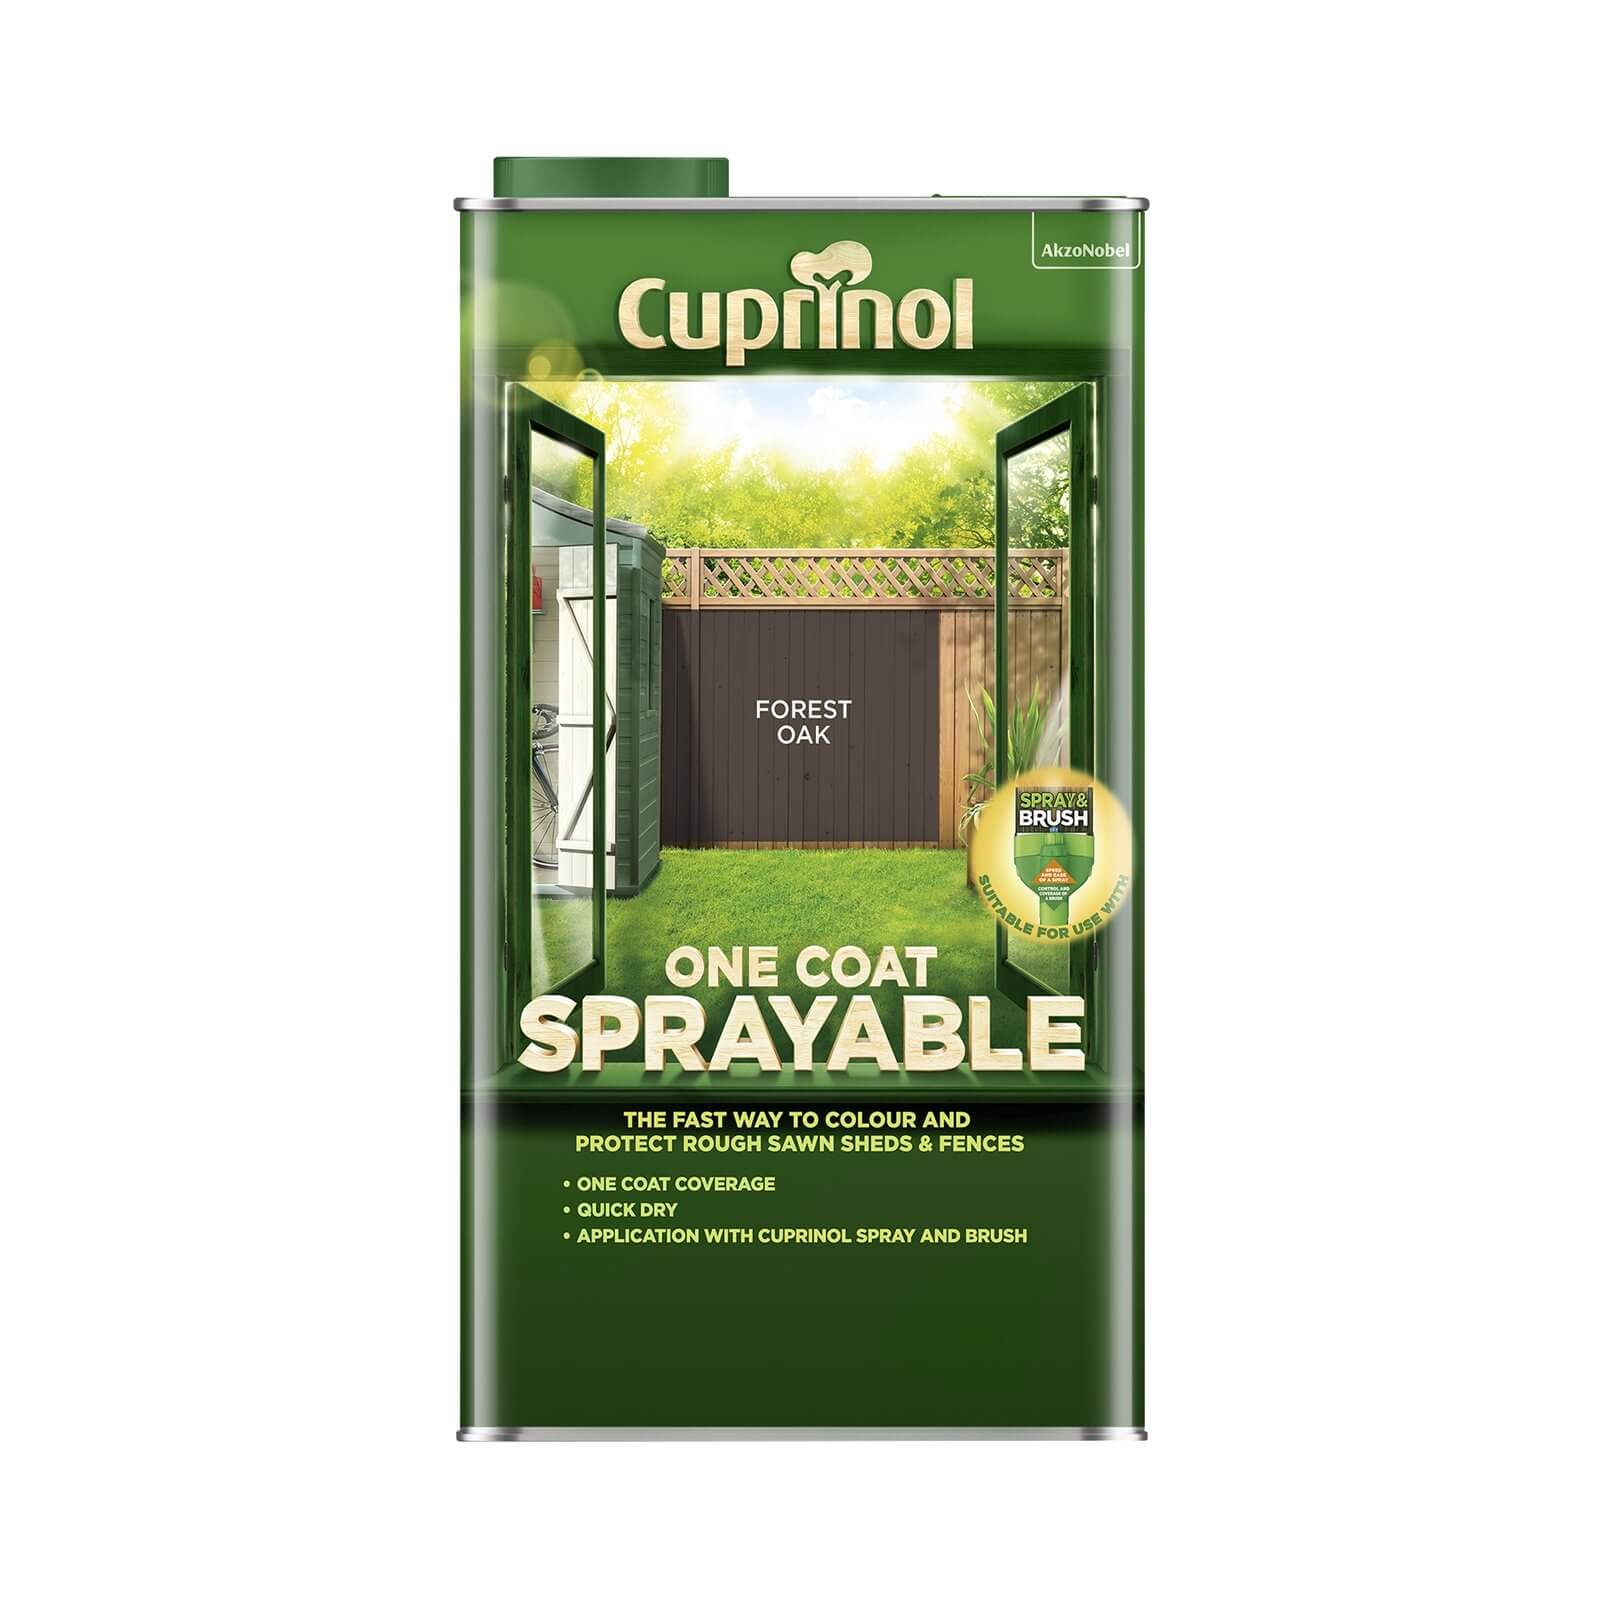 Photo of Cuprinol One Coat Sprayable Shed & Fence Paint - Forest Oak - 5l